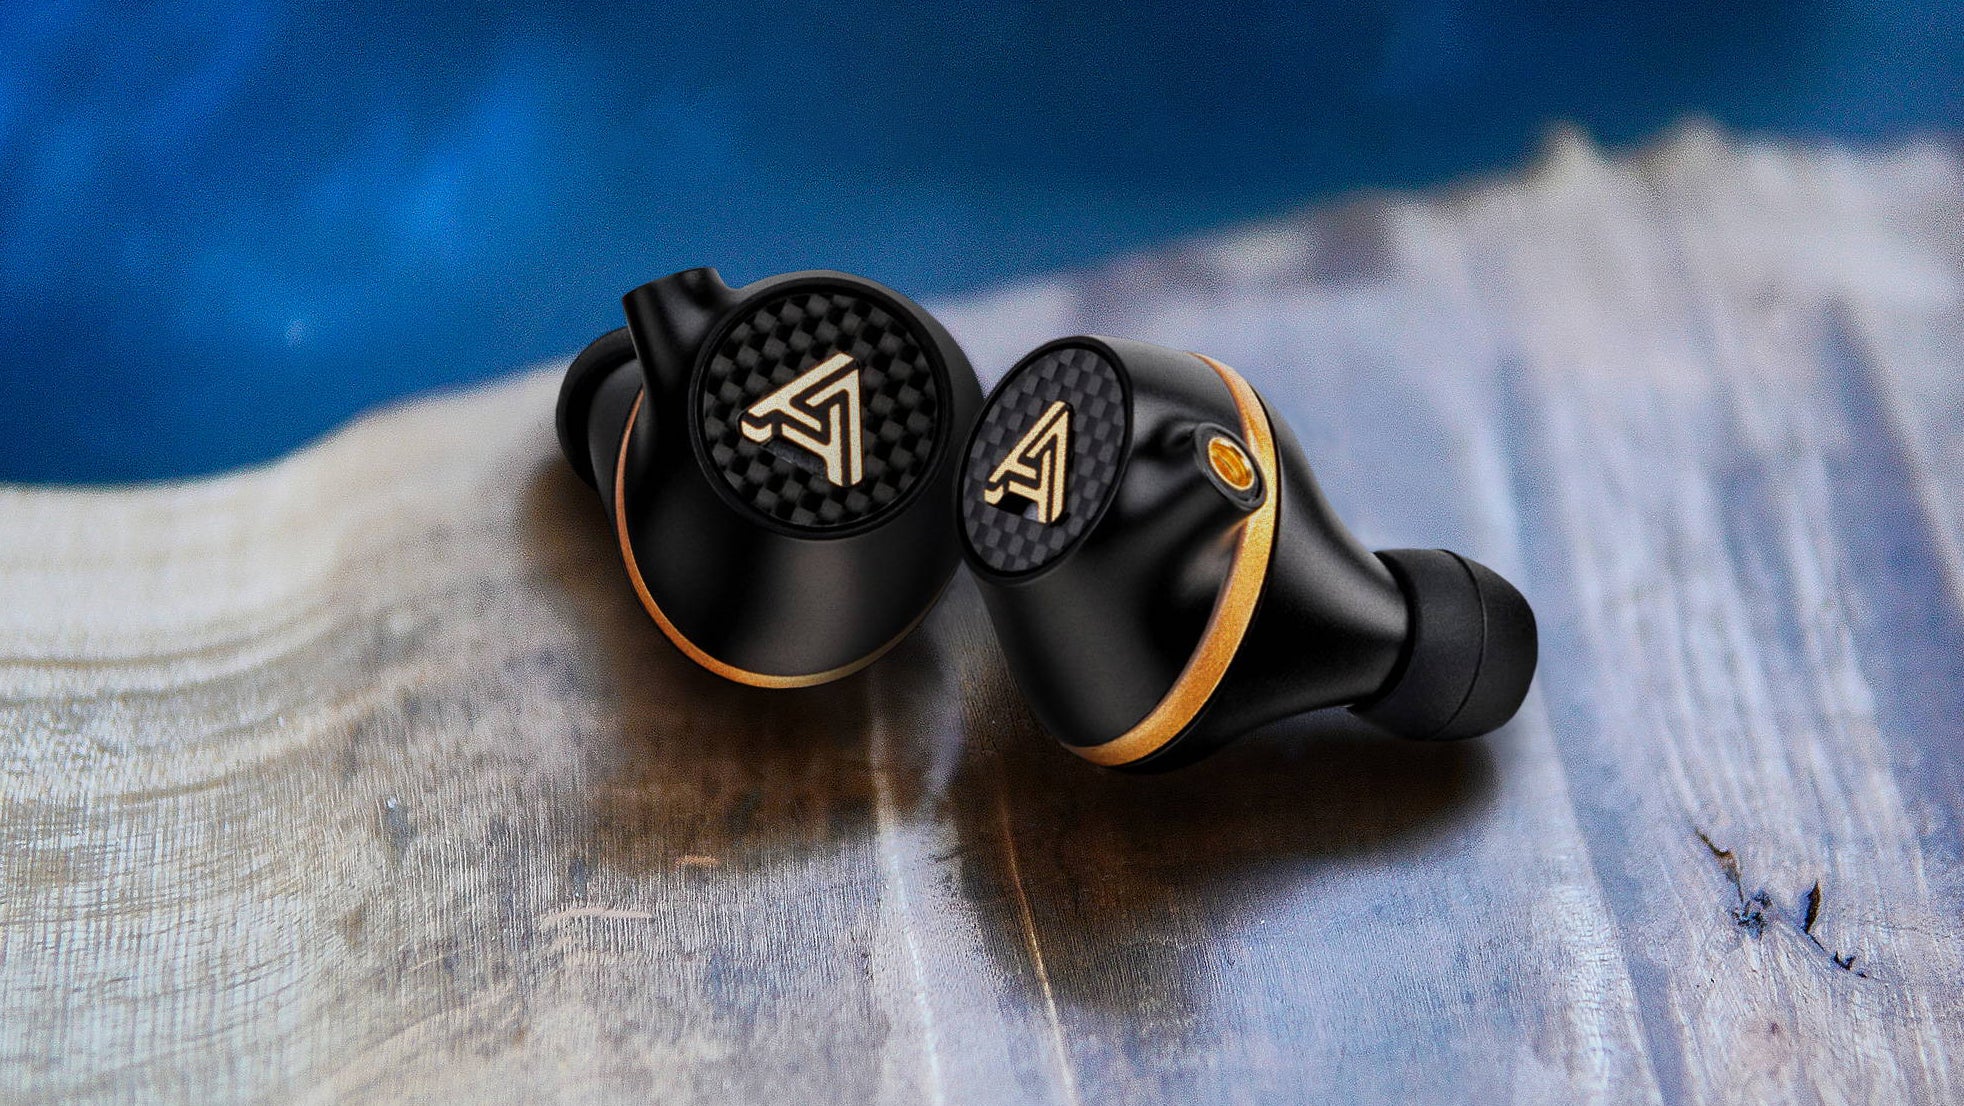 Audeze Euclid review: planar magnetic in-ears tested for gaming